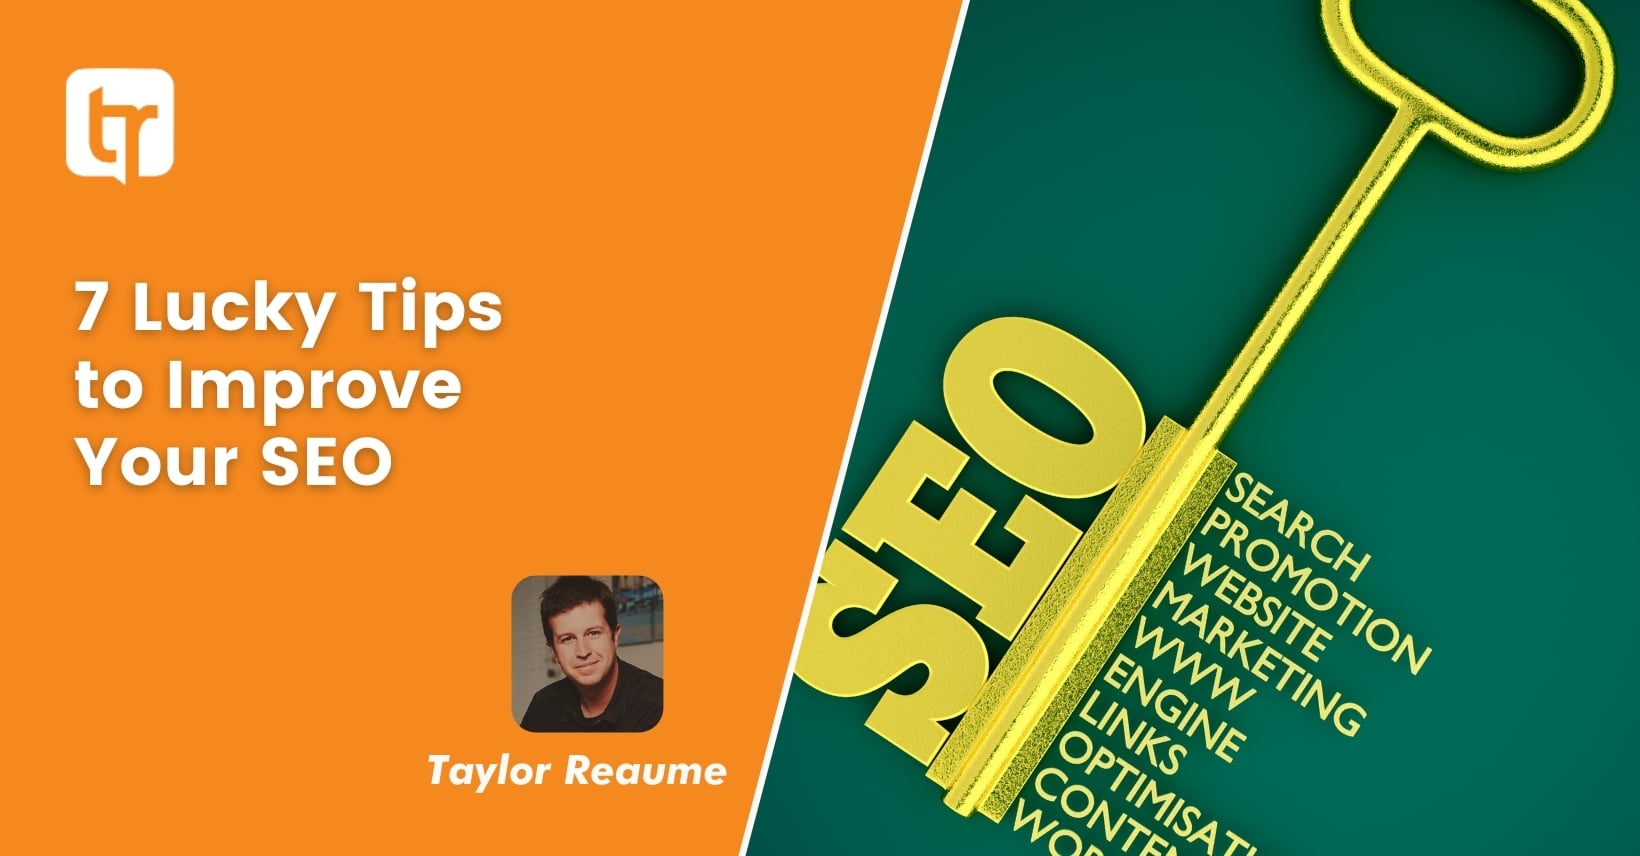 7 Lucky Tips to Improve Your SEO